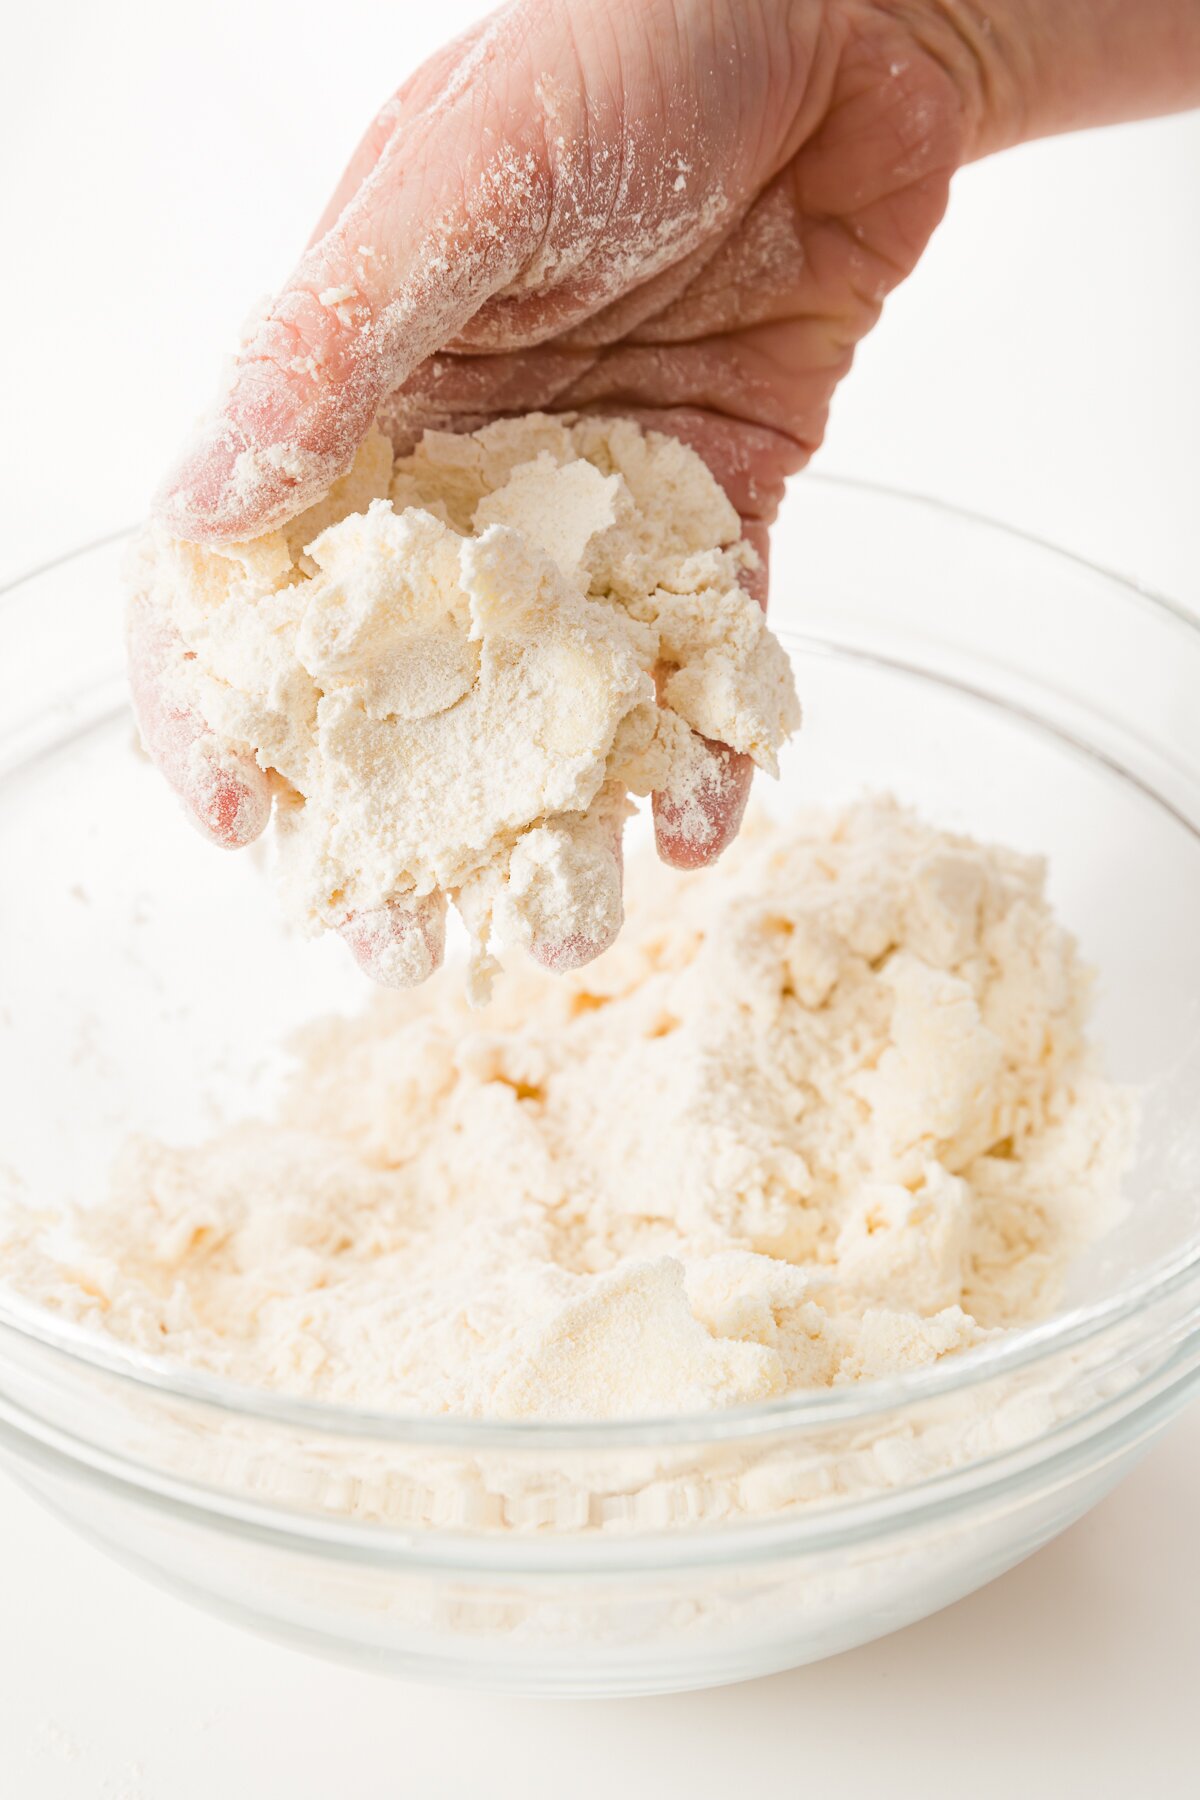 Hand holding a buttery dough over a glass bowl